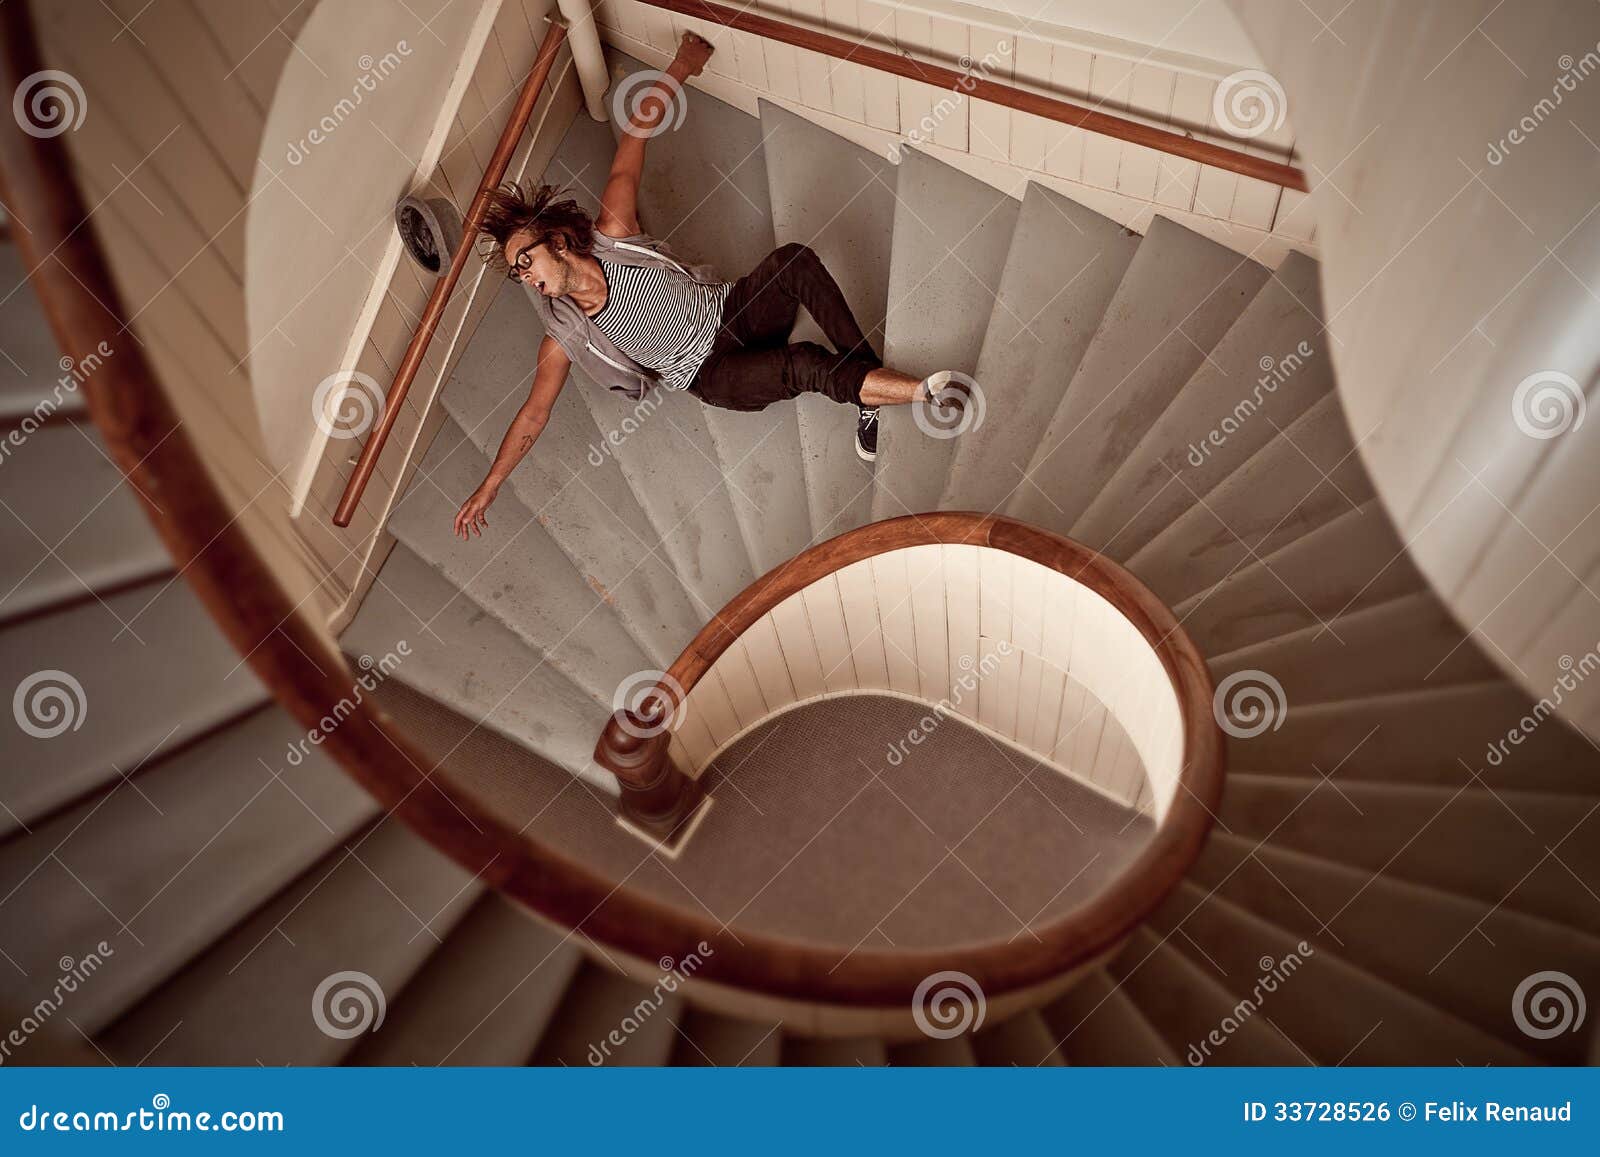 young man falling down the steep stairs